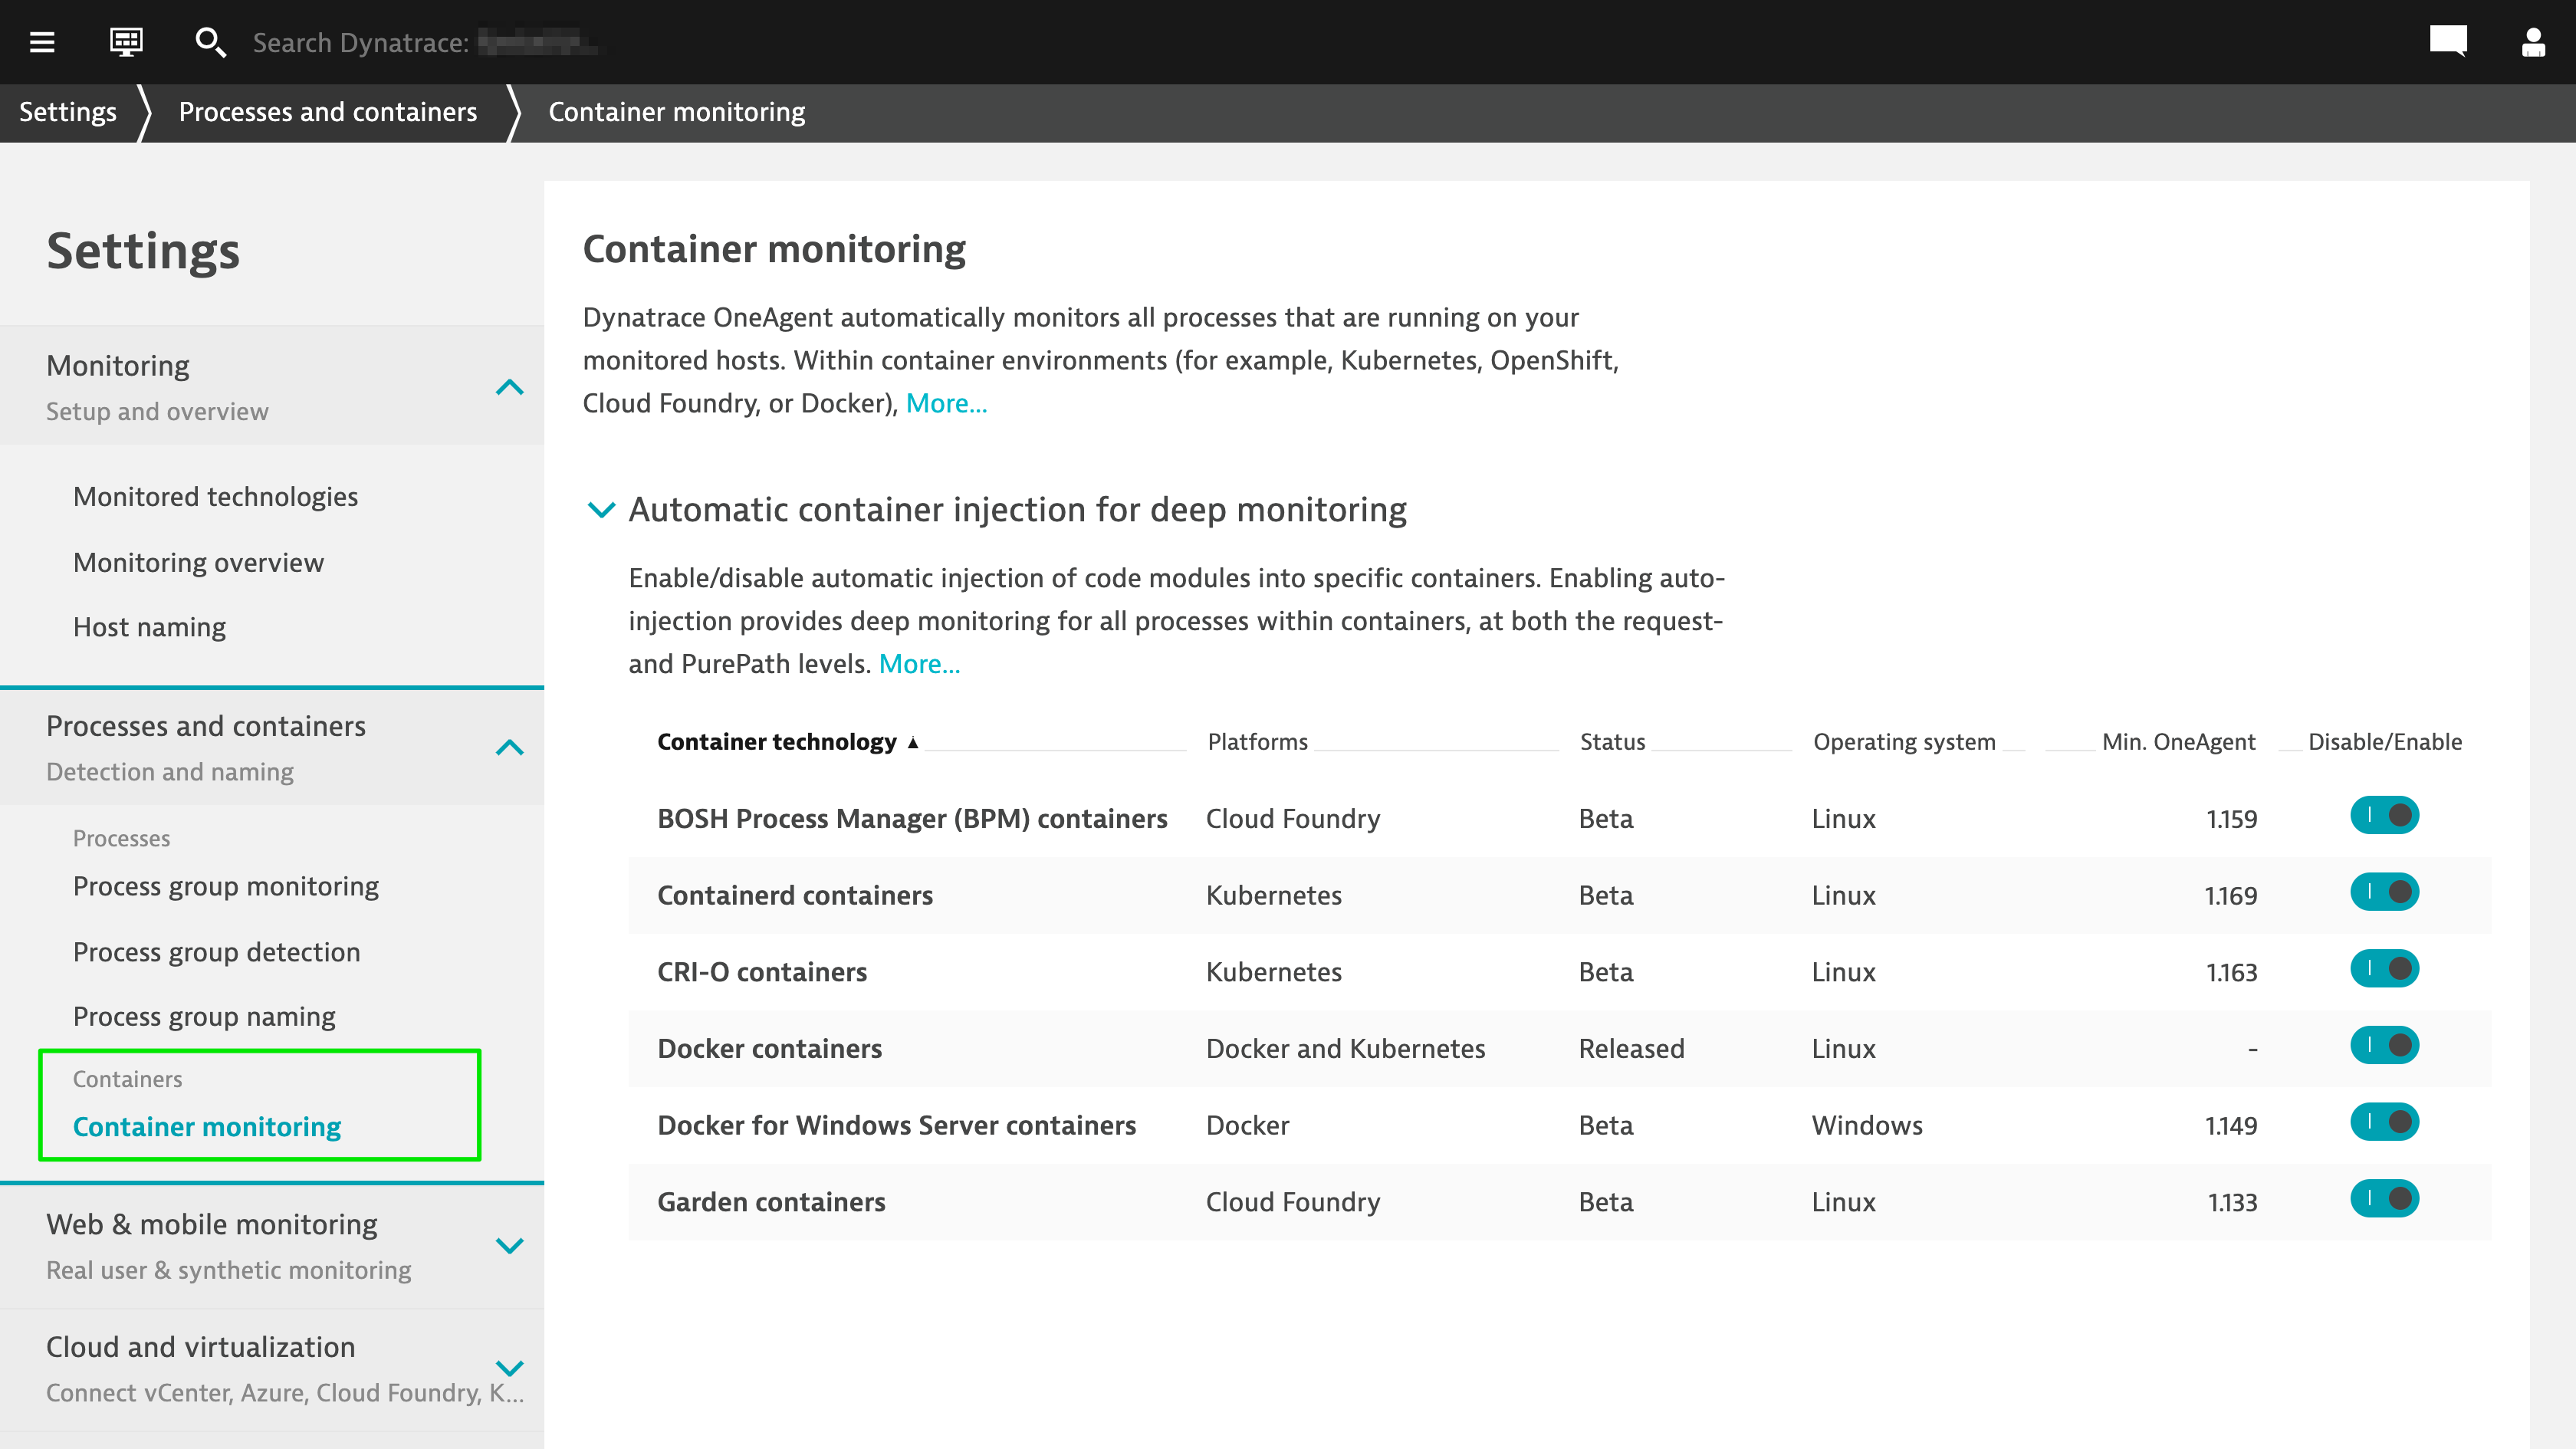 New container monitoring settings page